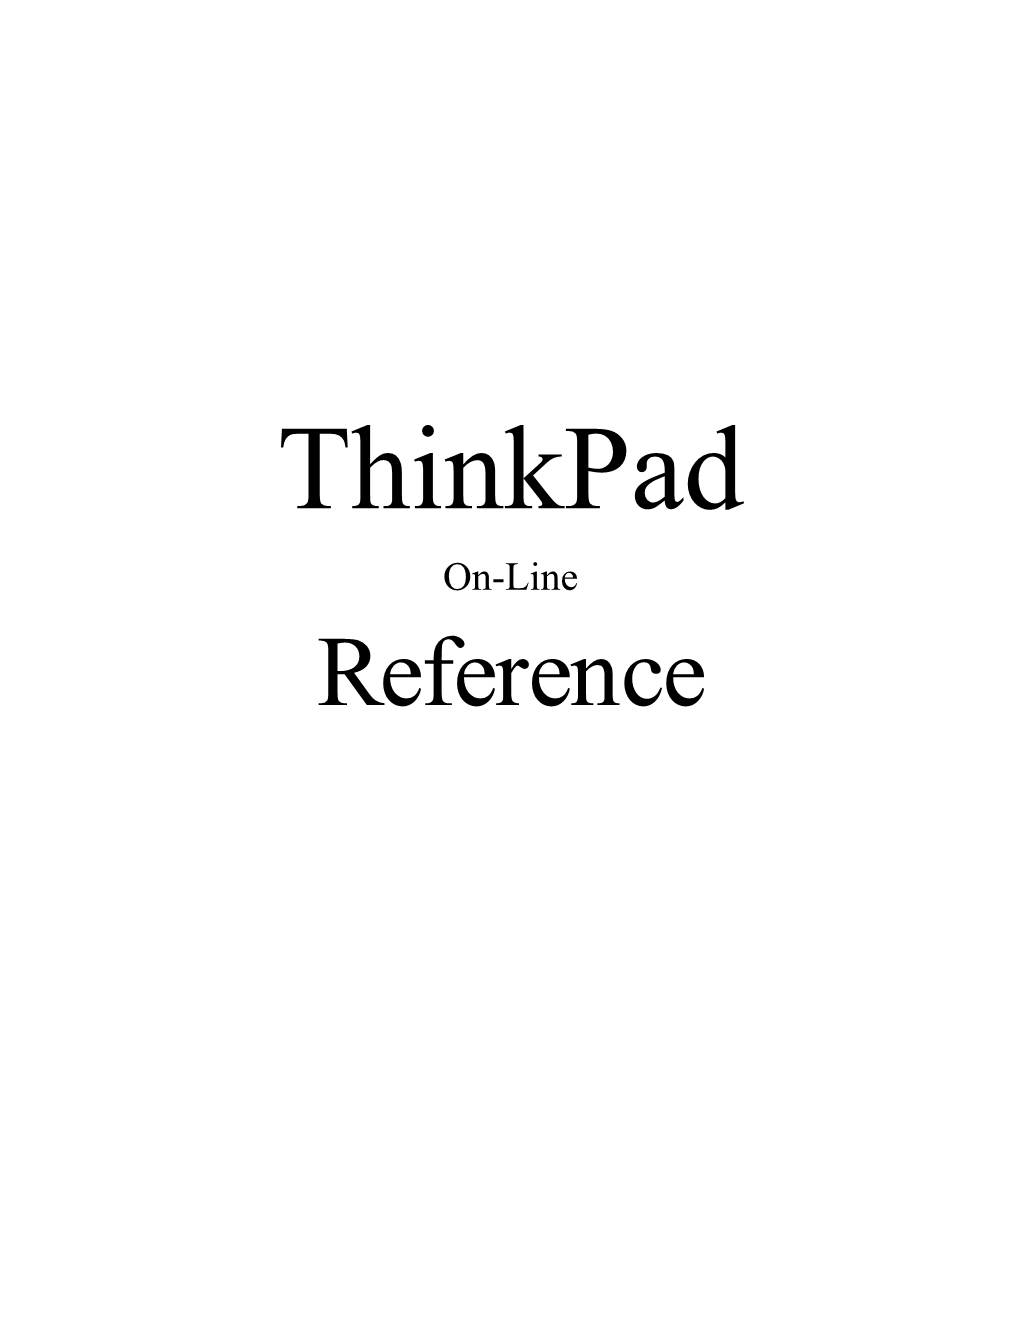 Thinkpad On-Line Reference 300 Series